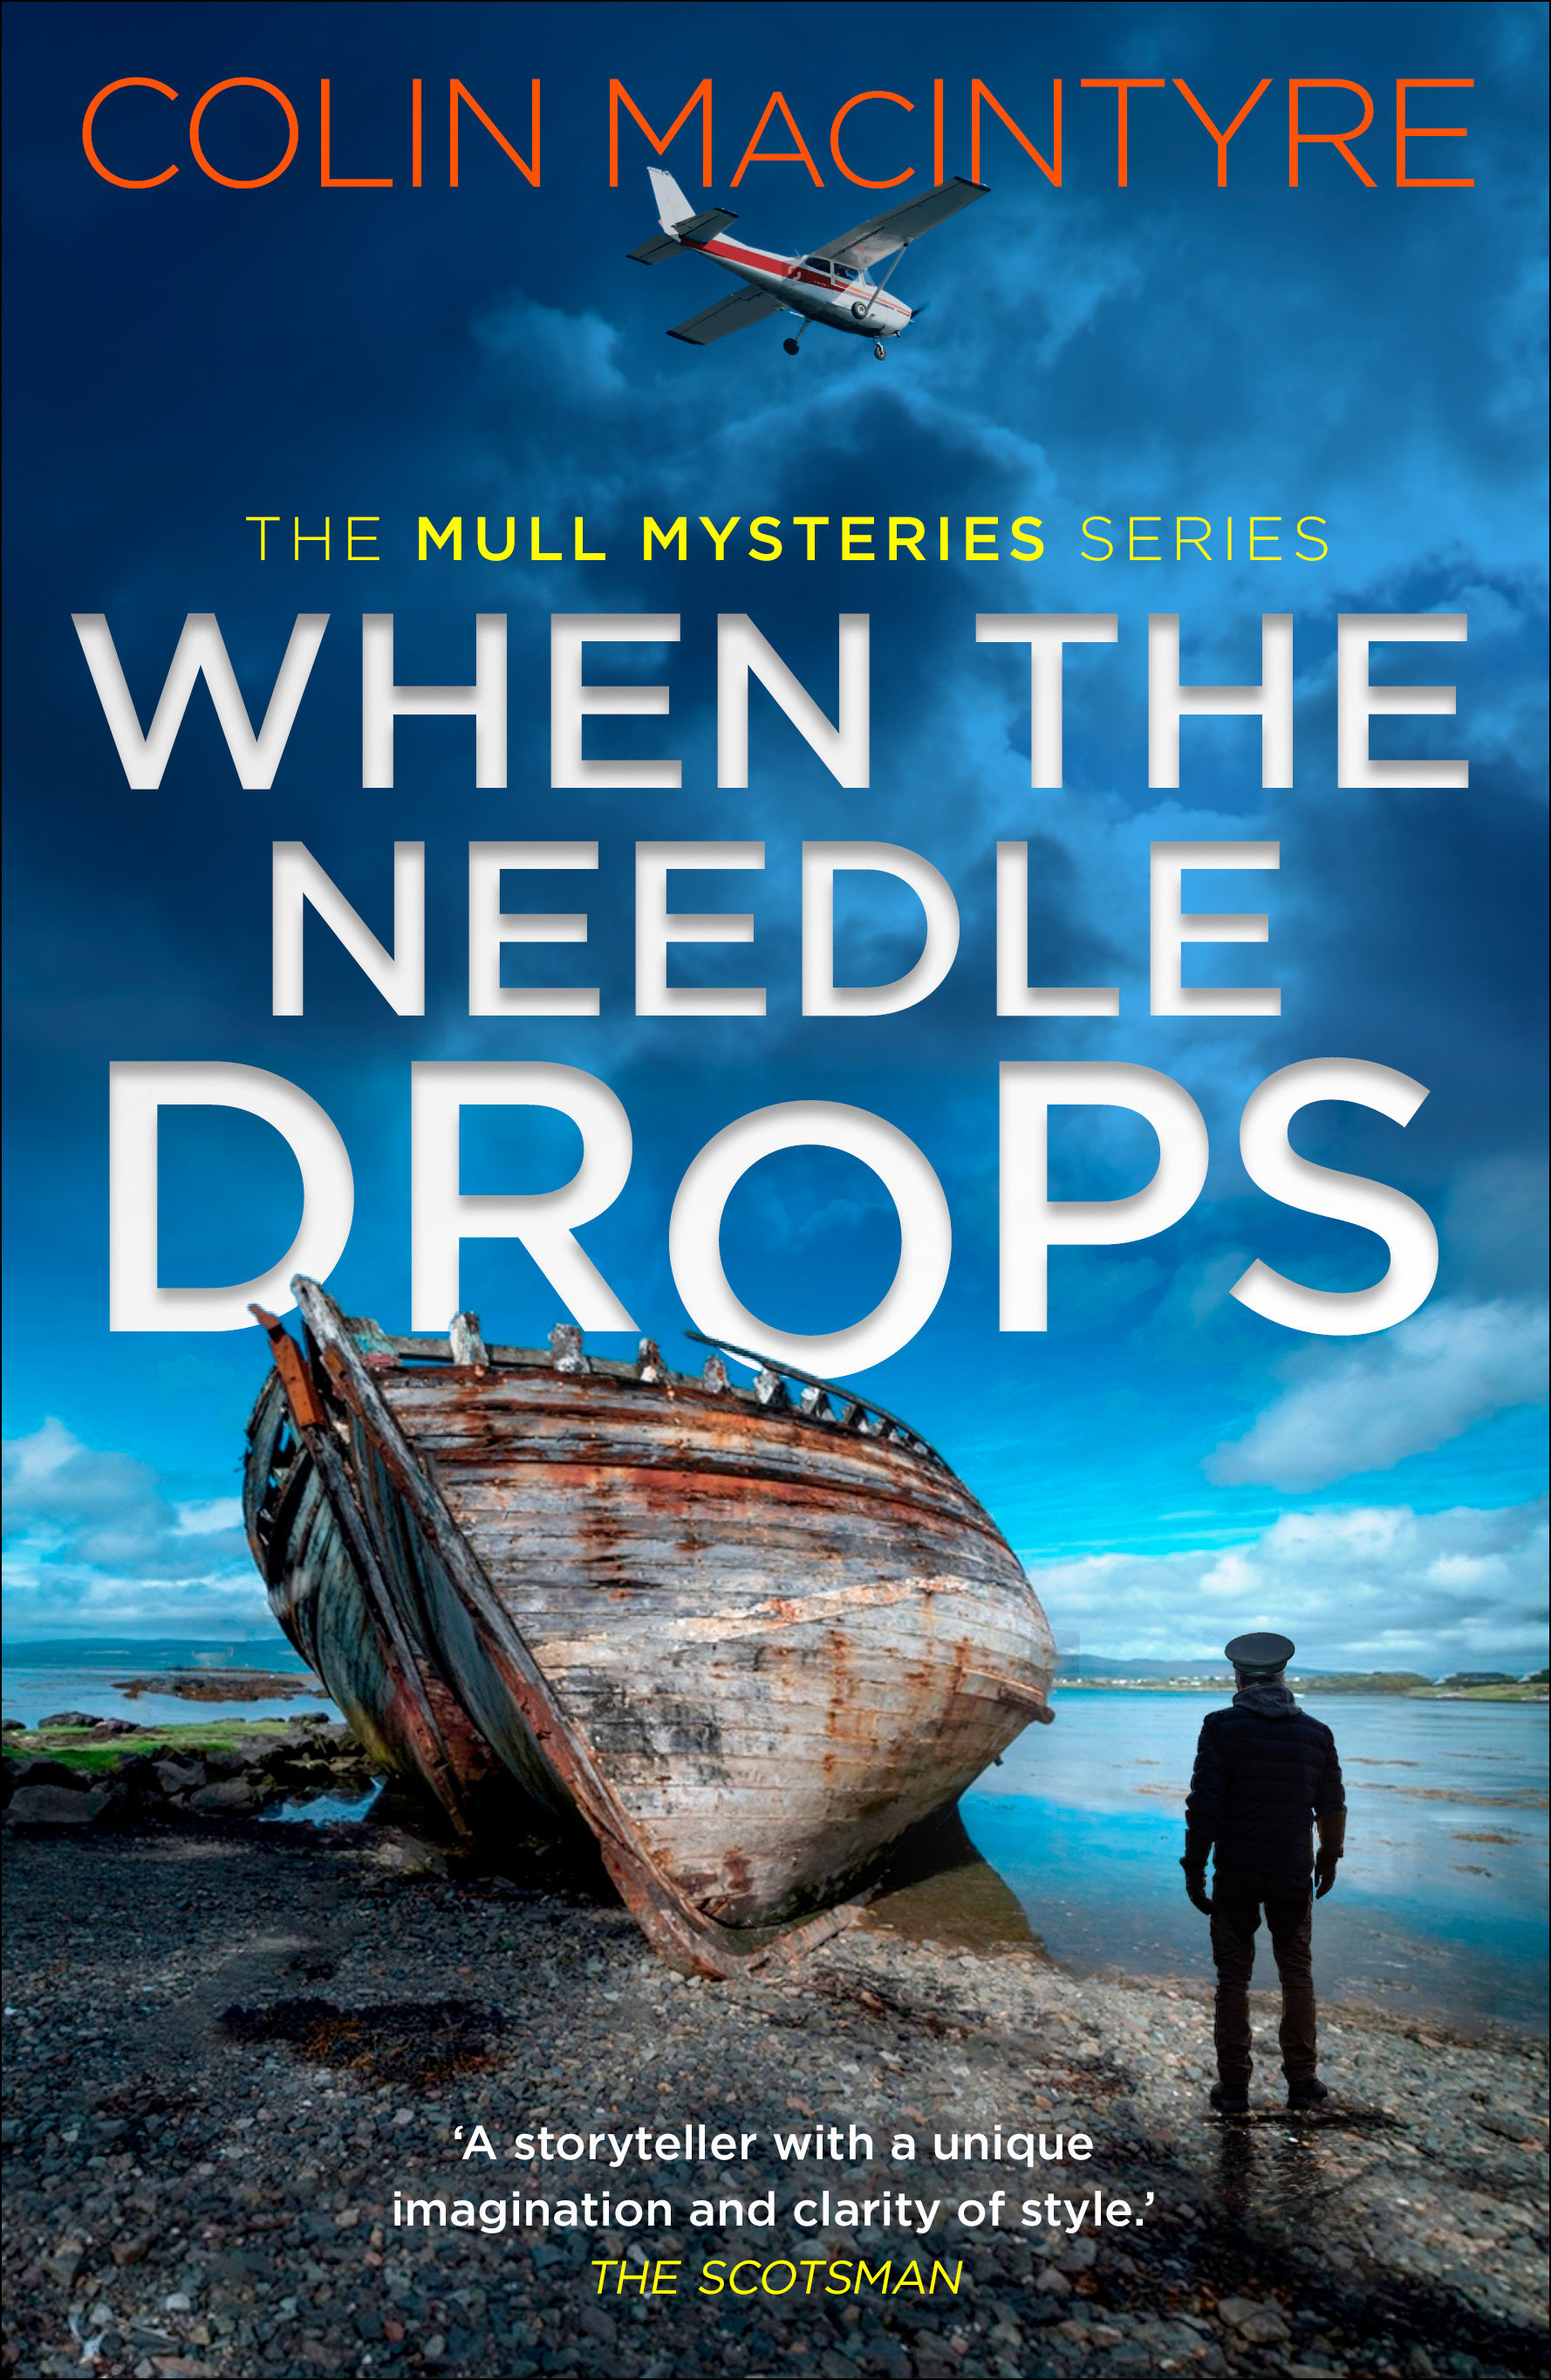 ANNOUNCING COLIN’S NEW NOVEL – ‘WHEN THE NEEDLE DROPS’ – PRE-ORDER NOW!